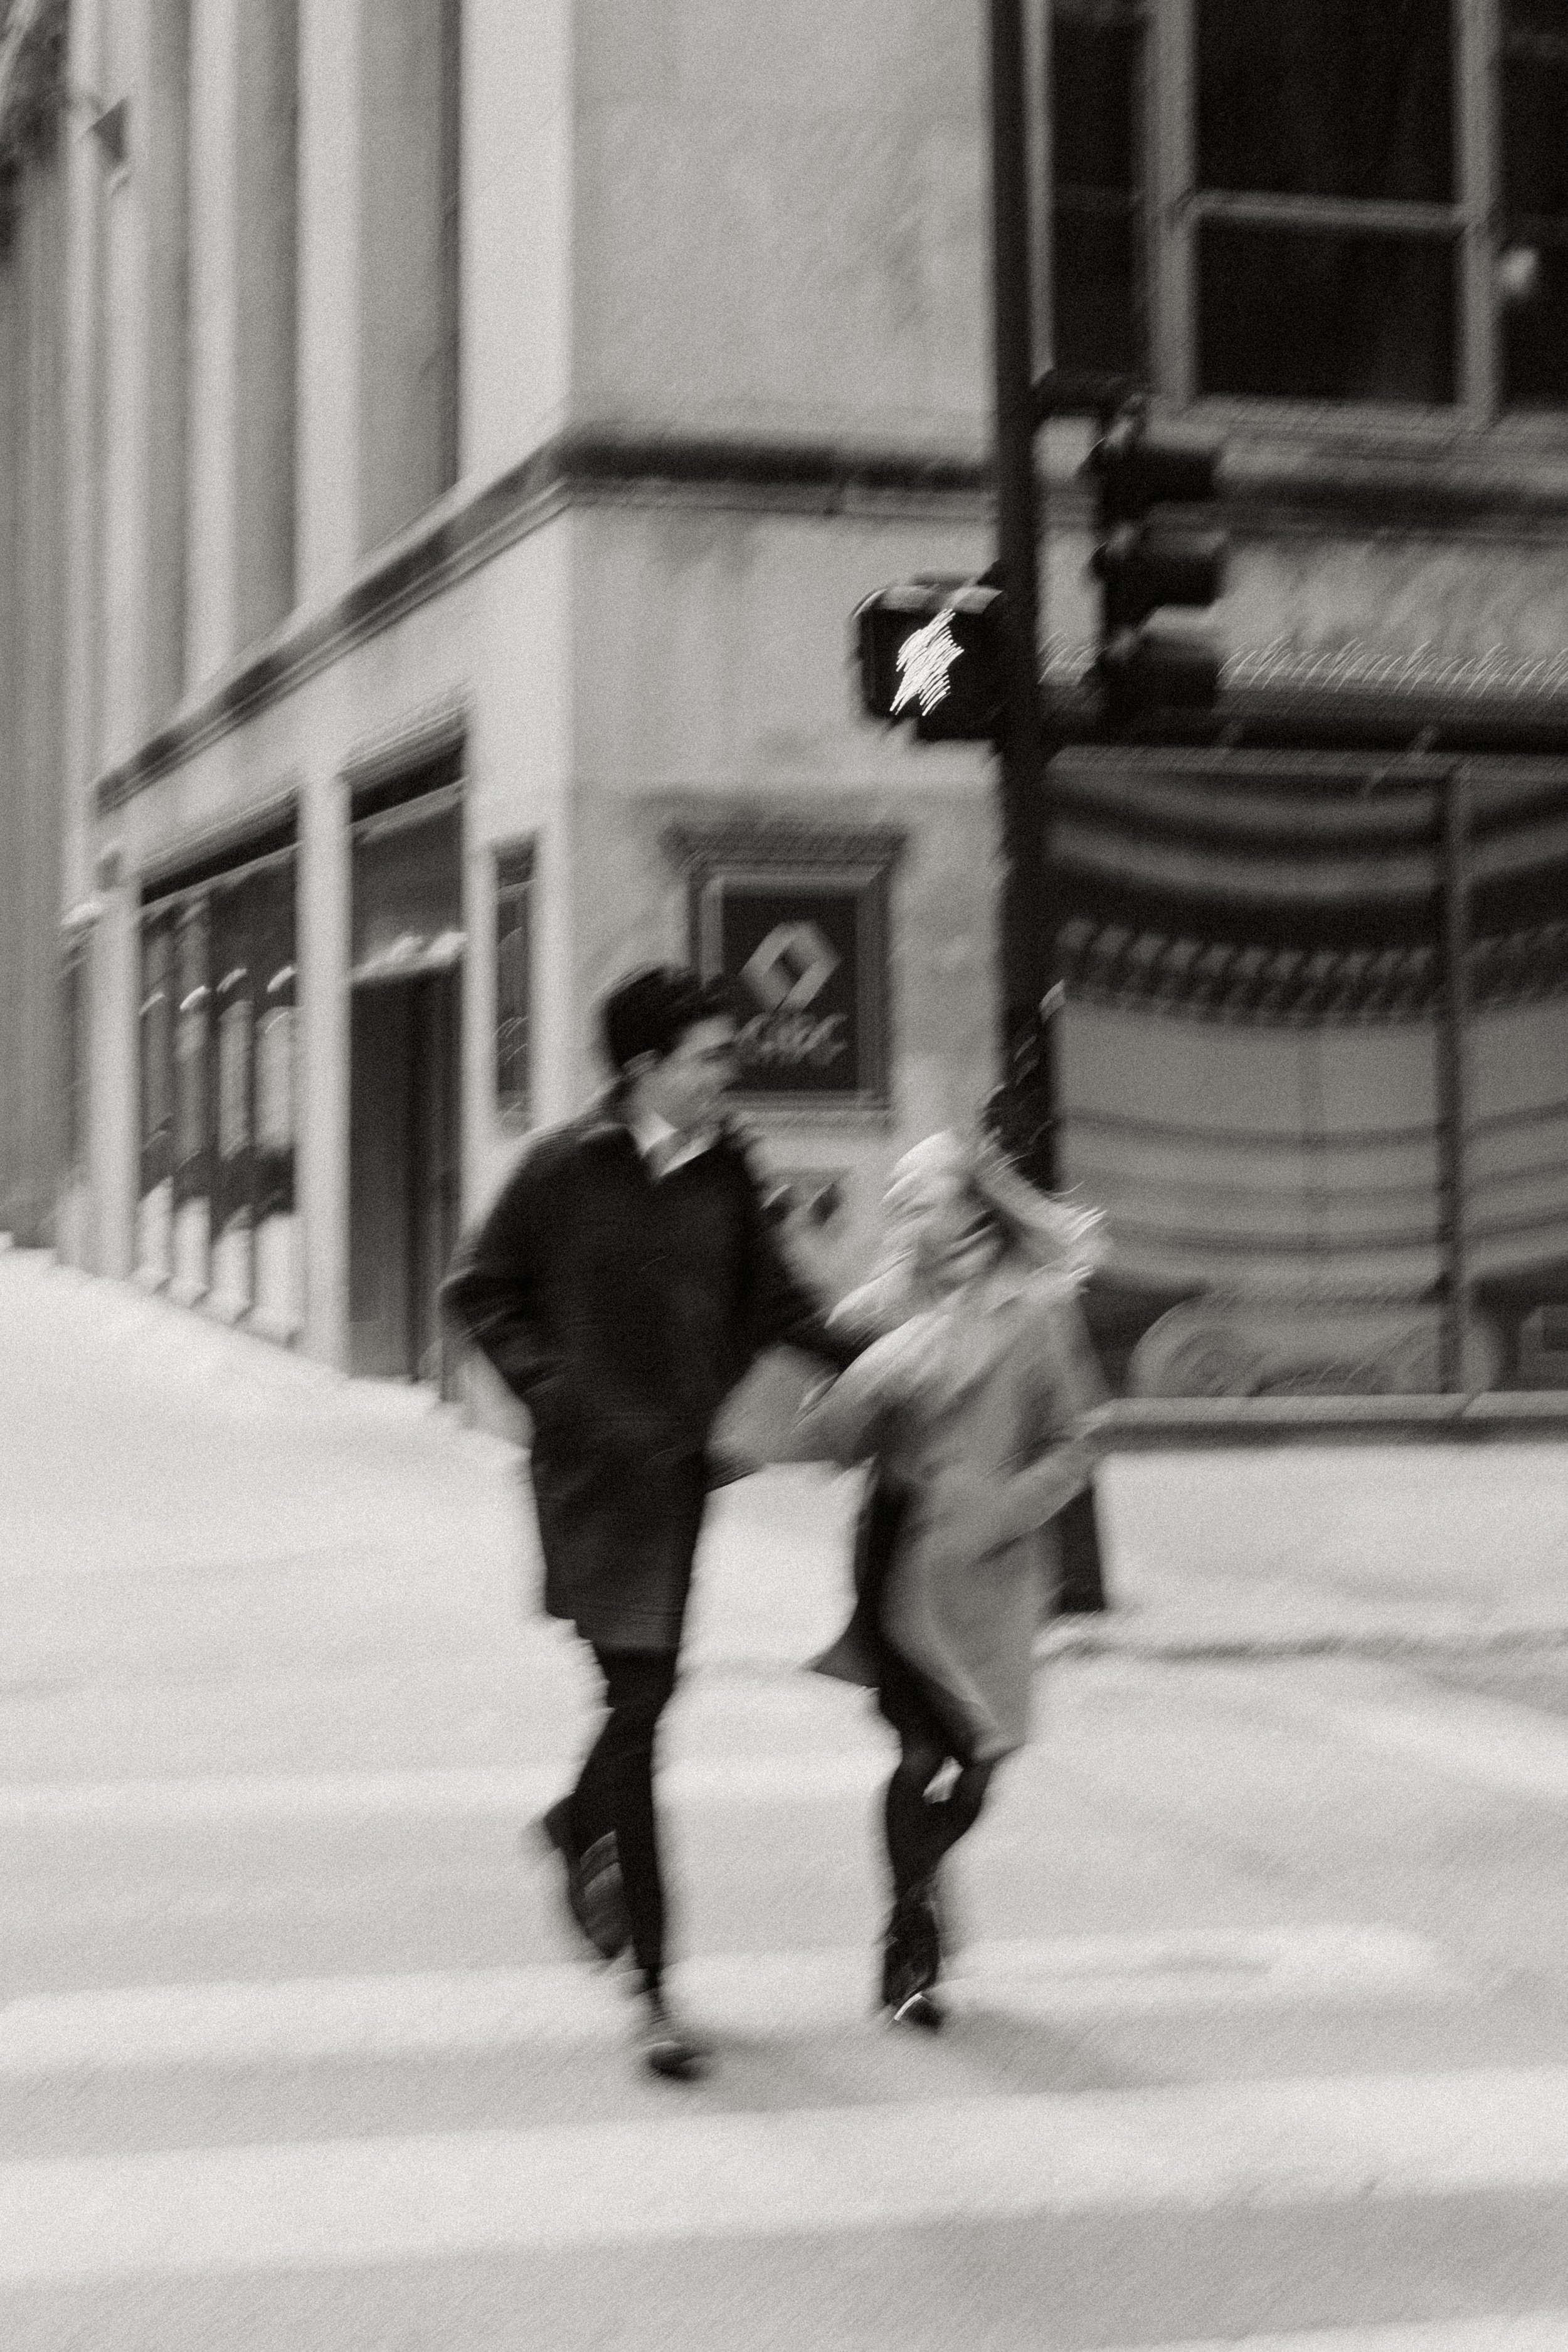 Downtown engagement photo